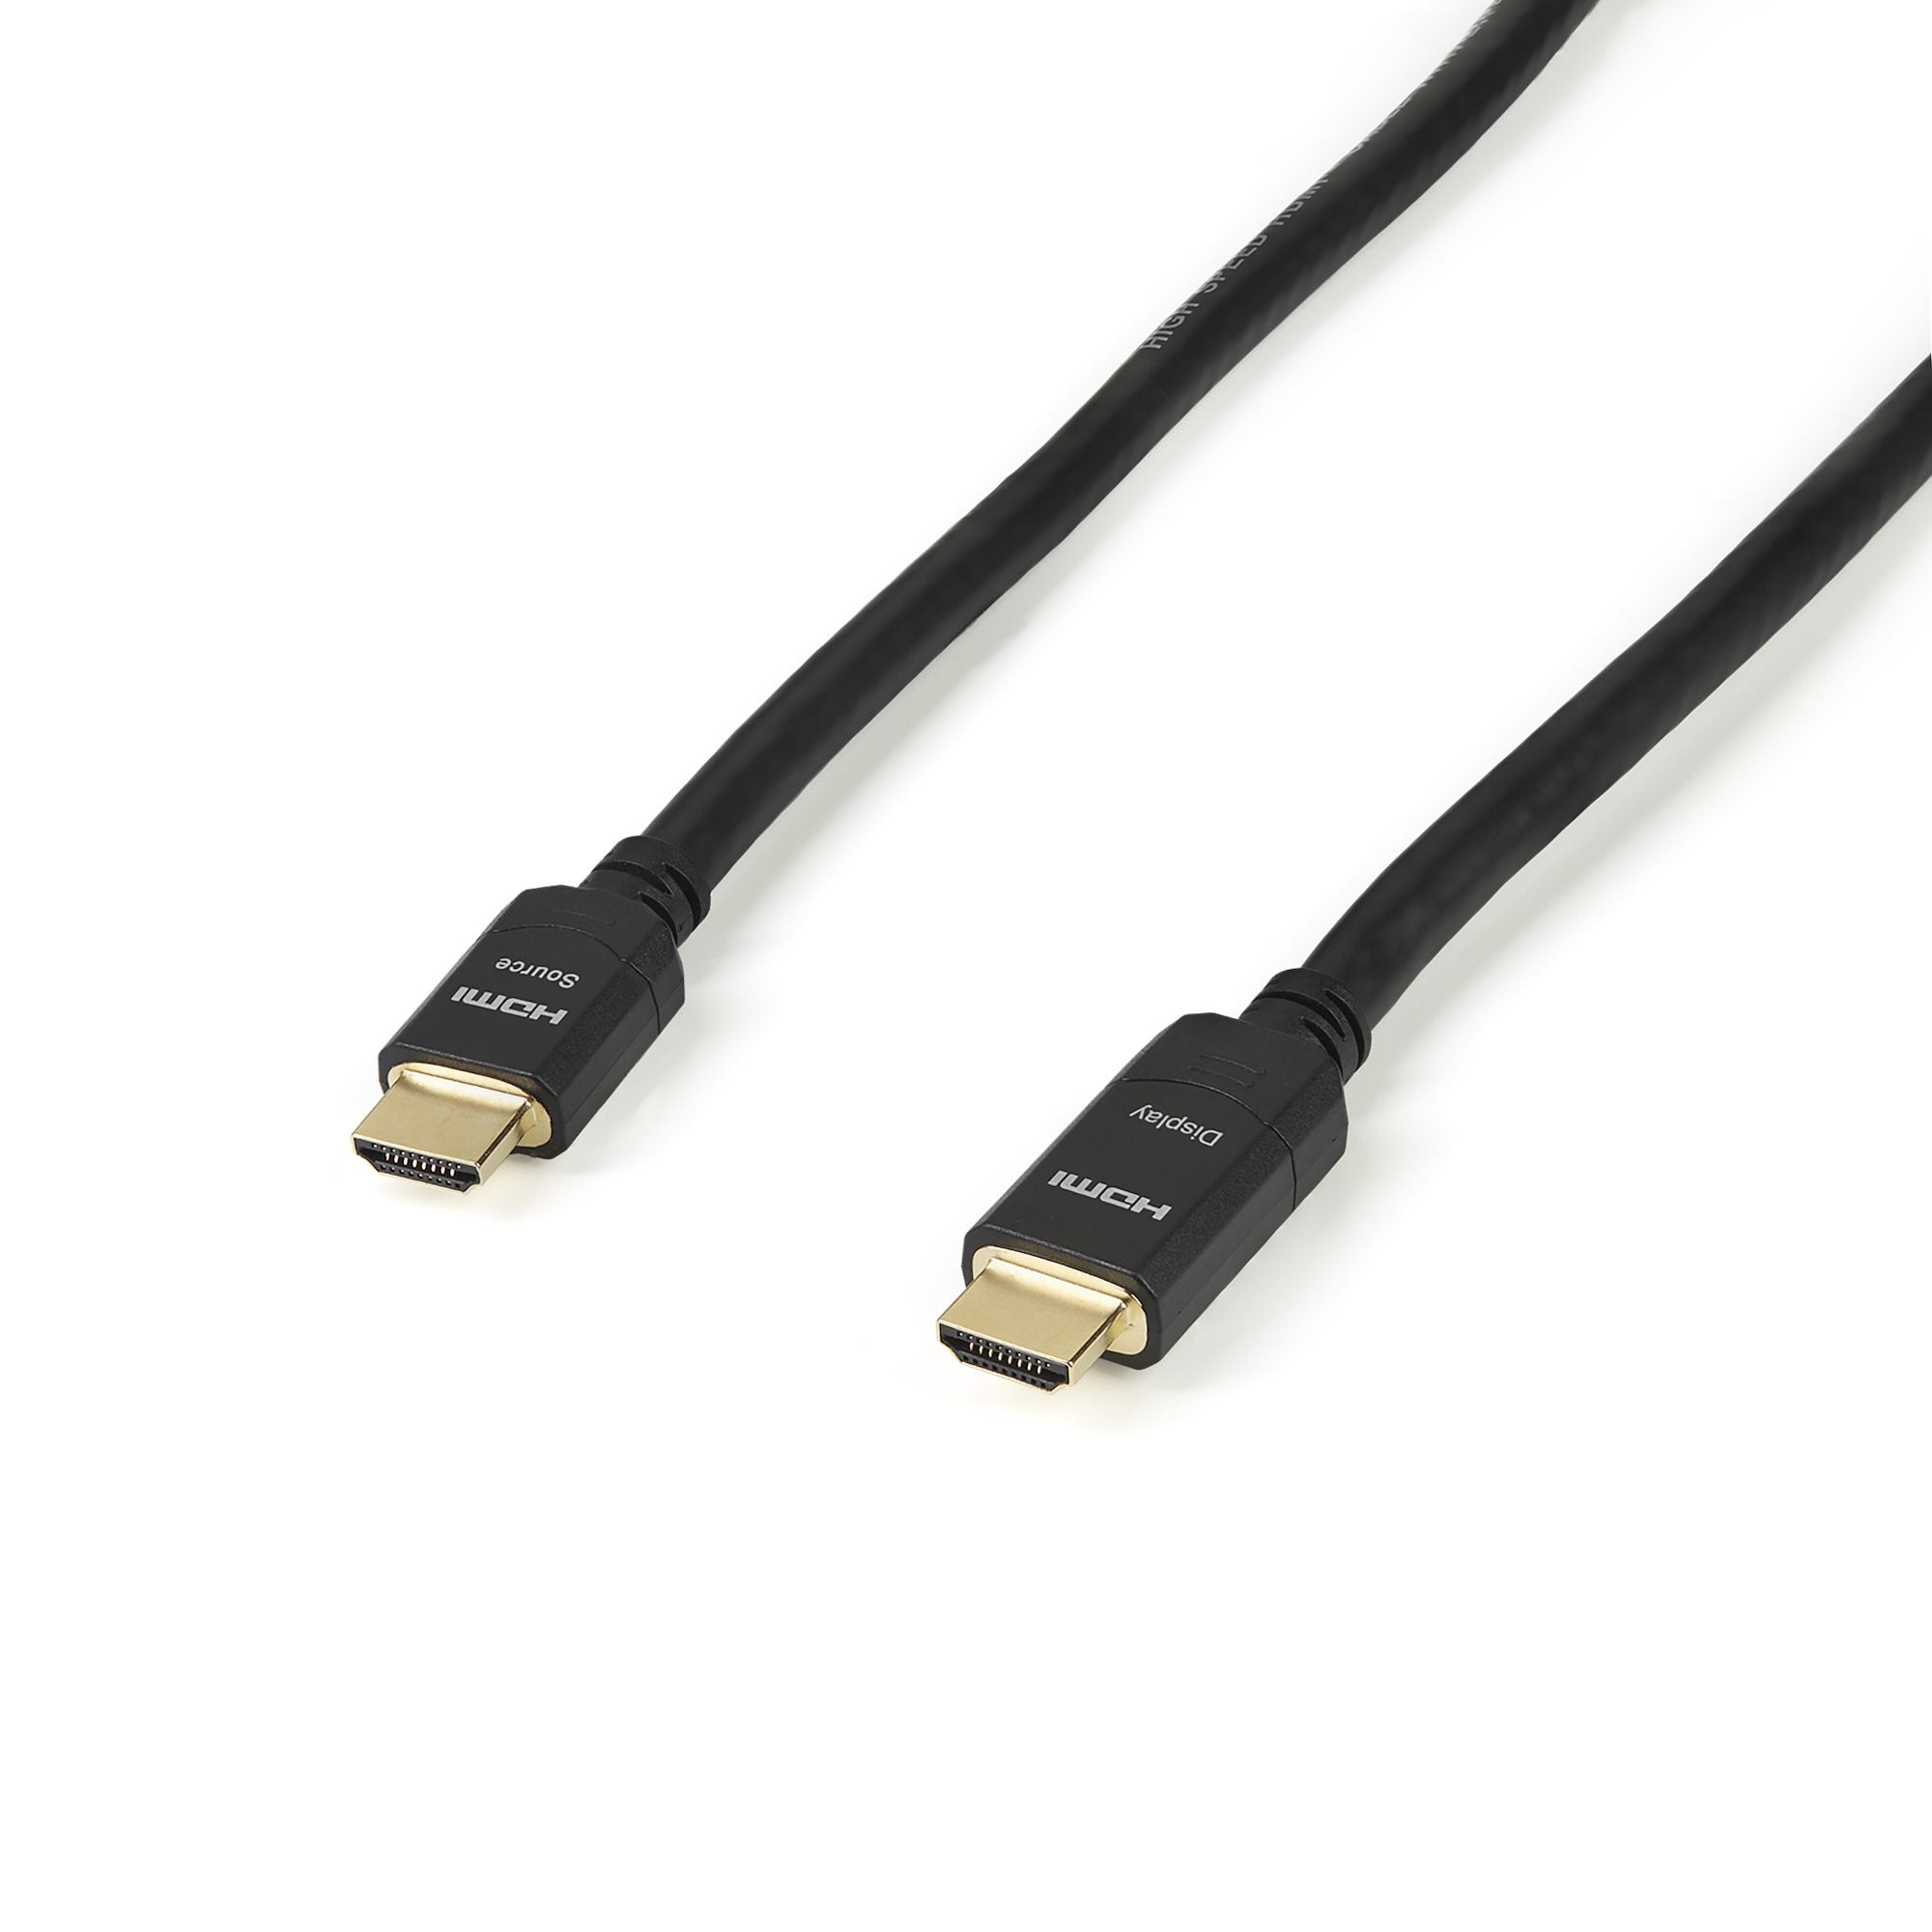 StarTech.com 98ft (30m) Active HDMI Cable - 4K High Speed HDMI Cable with Ethernet - CL2 Rated for In-Wall Install - 4K 30Hz Video - HDMI 1.4 Cord - For HDMI Monitor, Projector, TV, Display